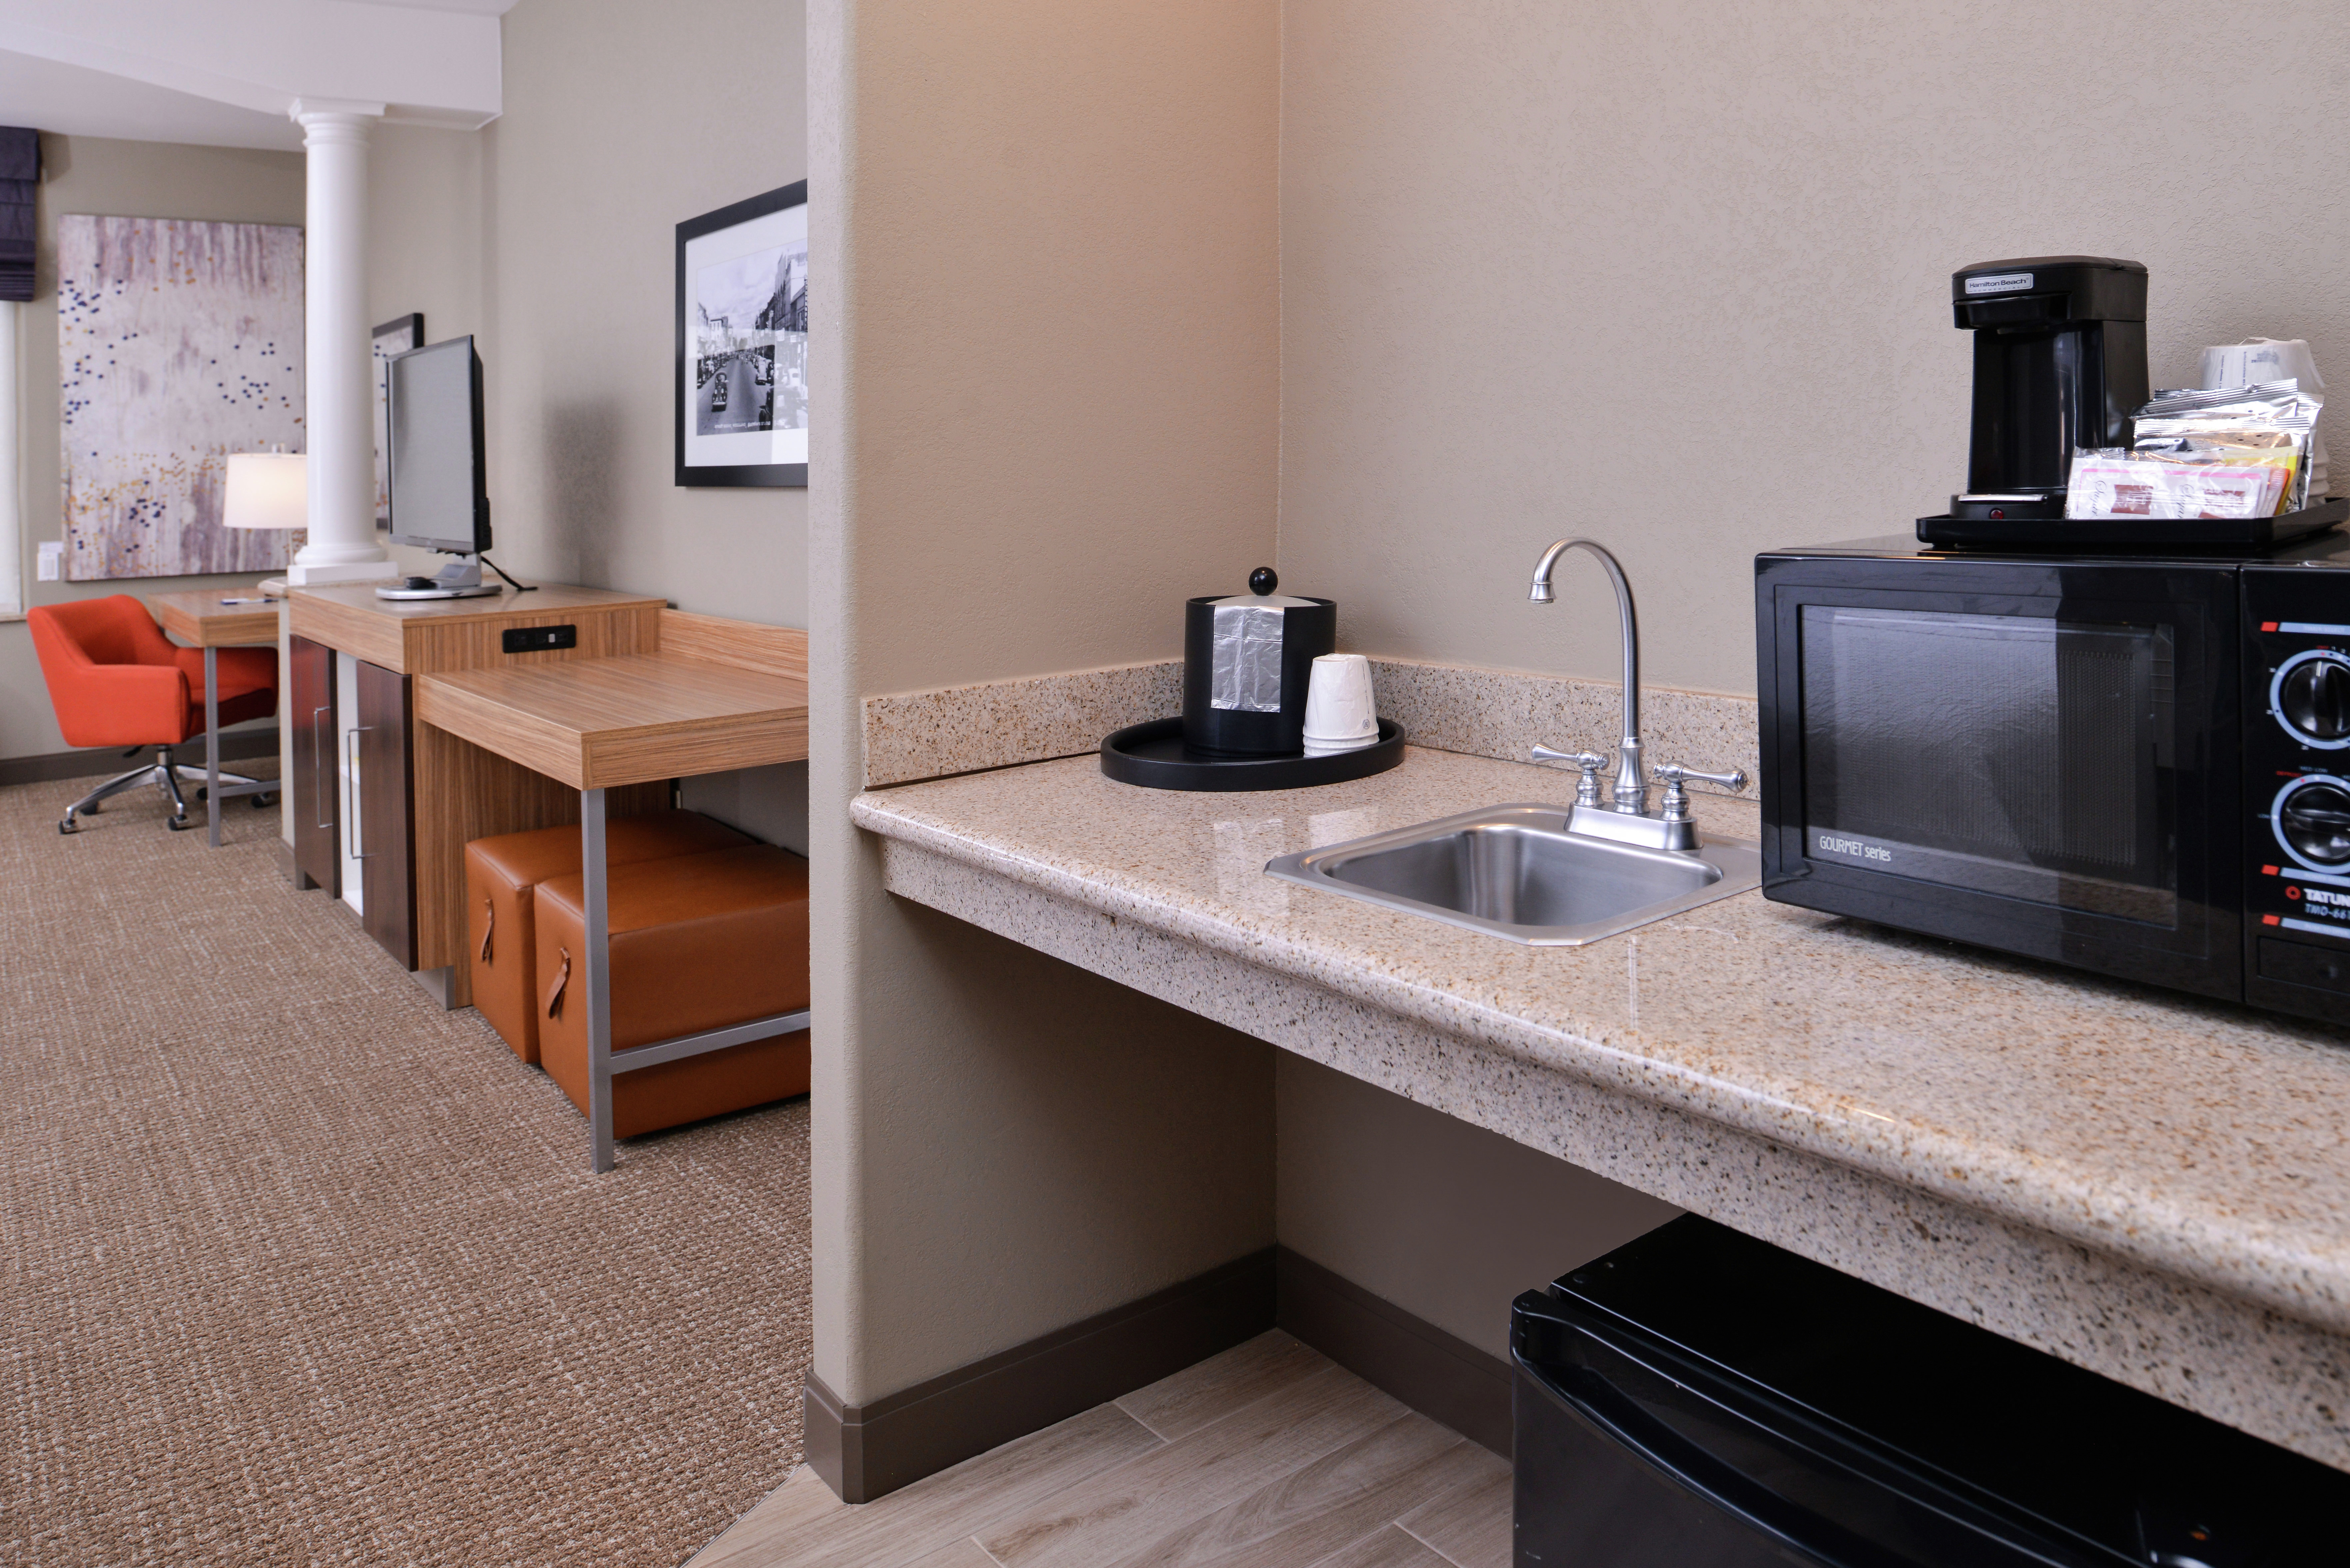 Queen Suite Wet Bar Area with Coffee Maker and Microwave